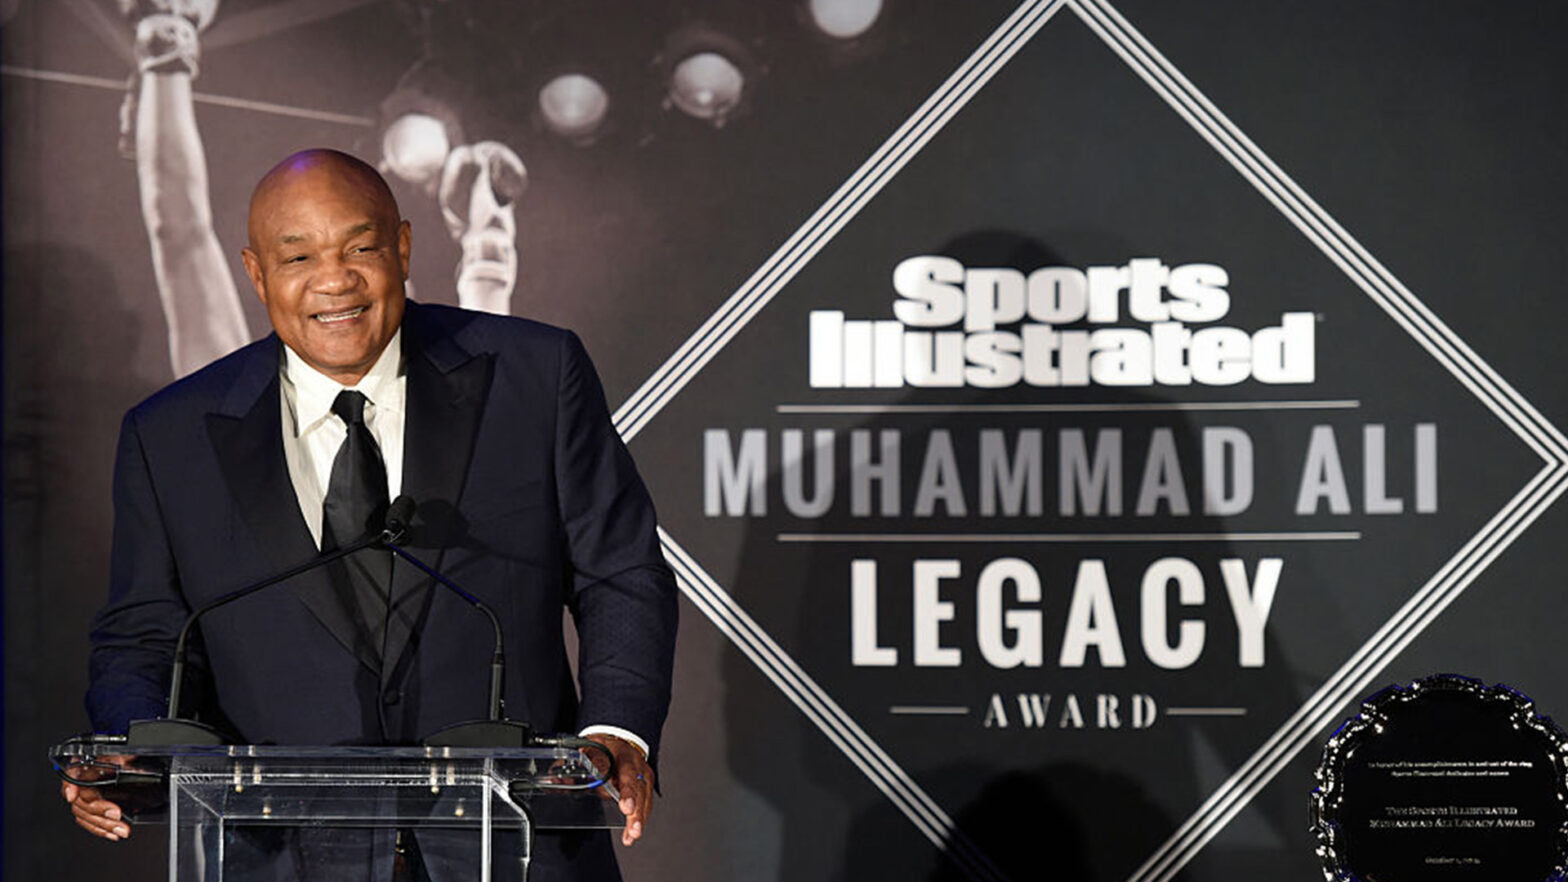 George Foreman Nearly Went Bankrupt In 1986 Then Bounced Back To An Estimated $300M Fortune